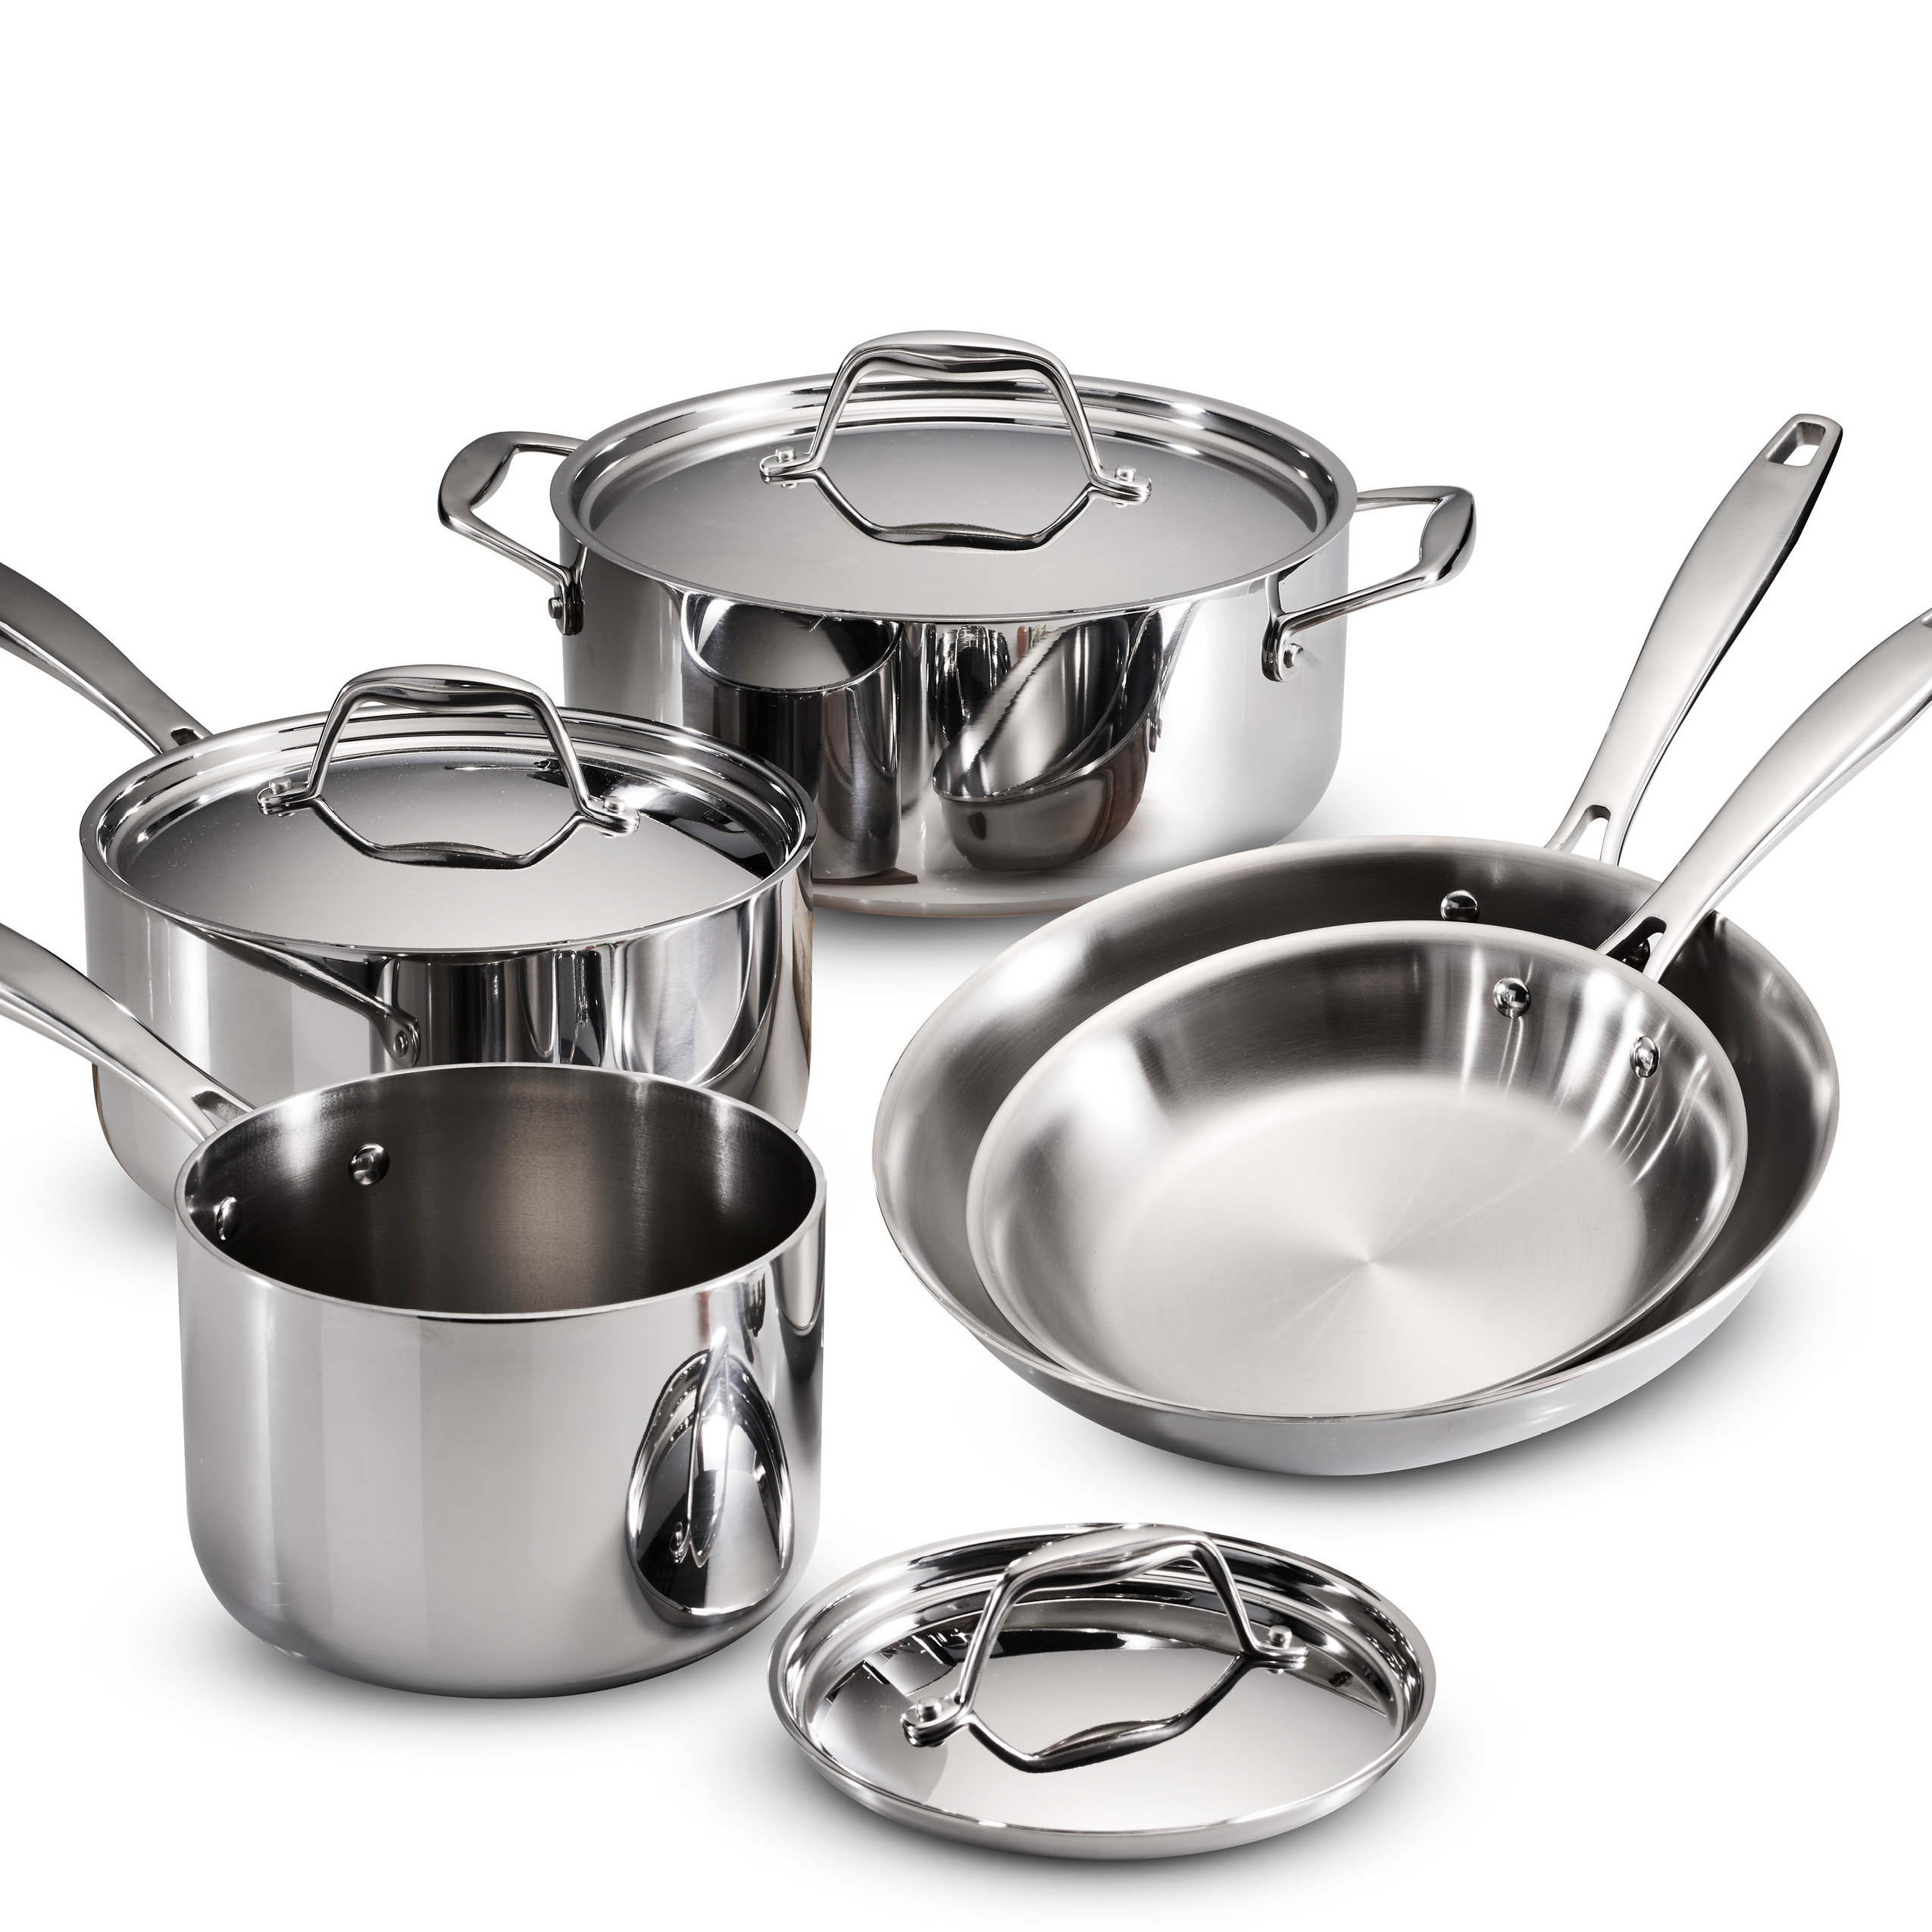 Tramontina Tri-Ply Clad Gourmet 8 Pc Cookware Set